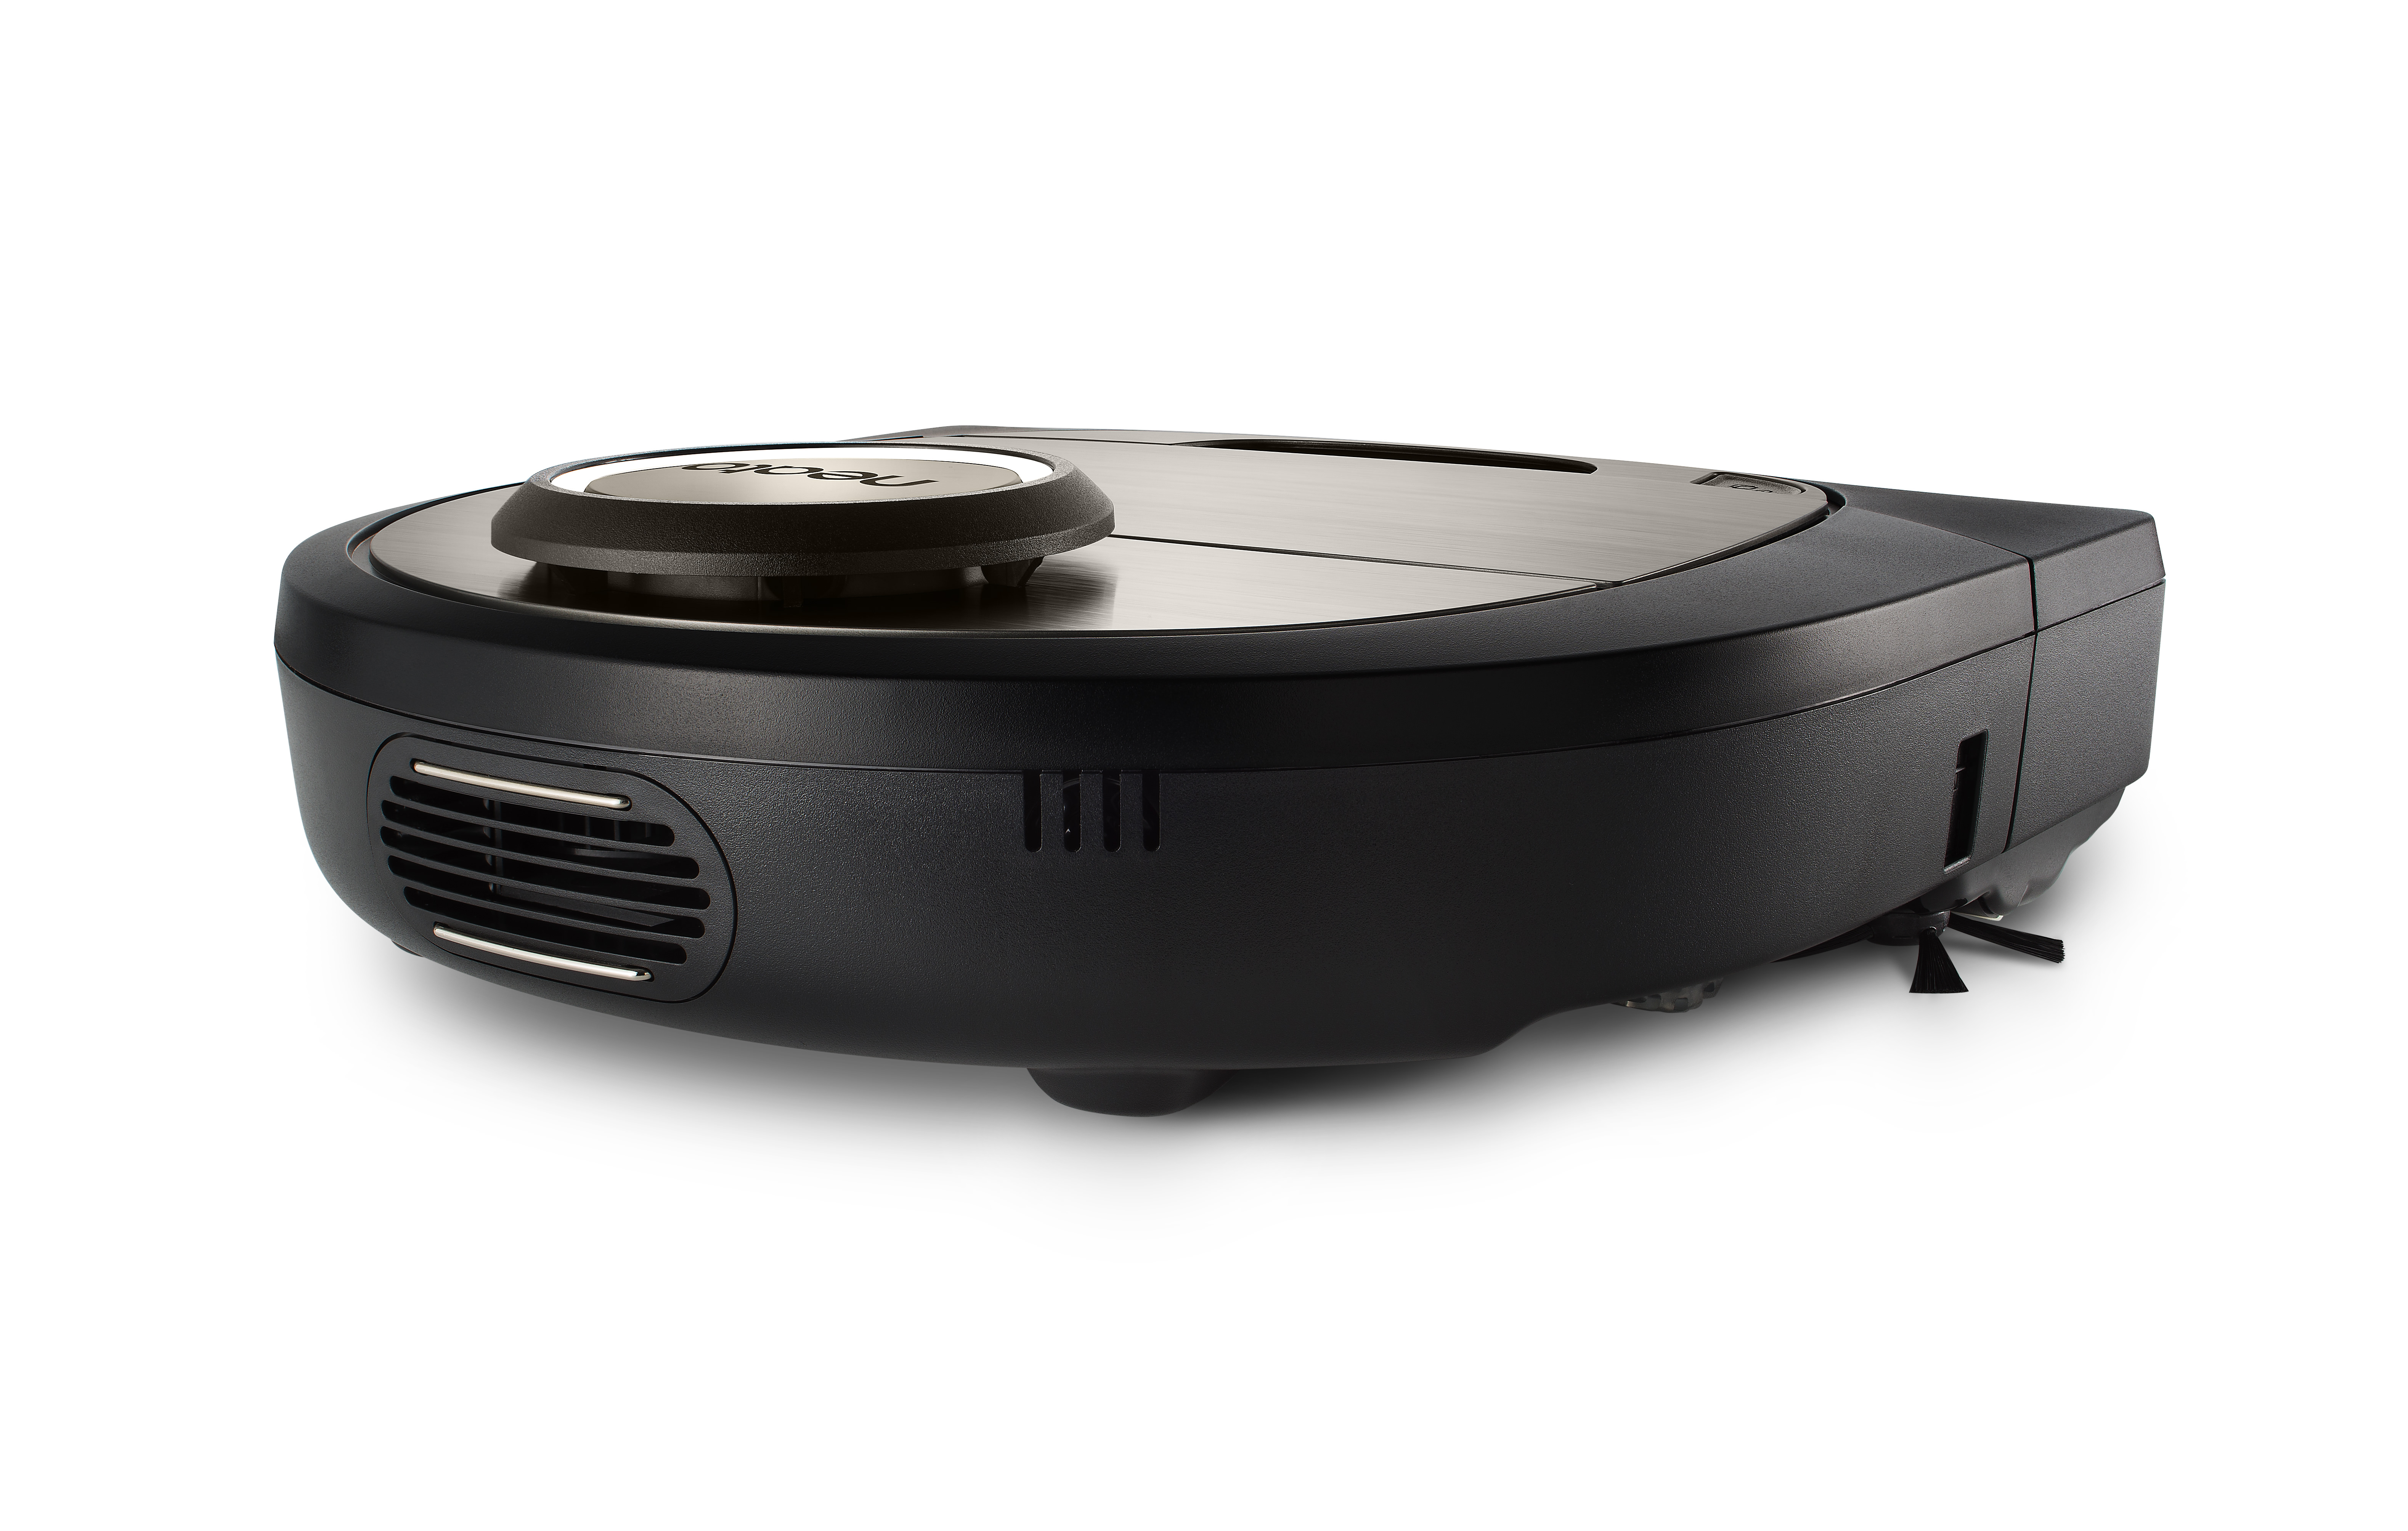 Neato Robotics Botvac D7 Wi-Fi Connected Robot Vacuum with Multi-floor Plan Mapping - image 4 of 8